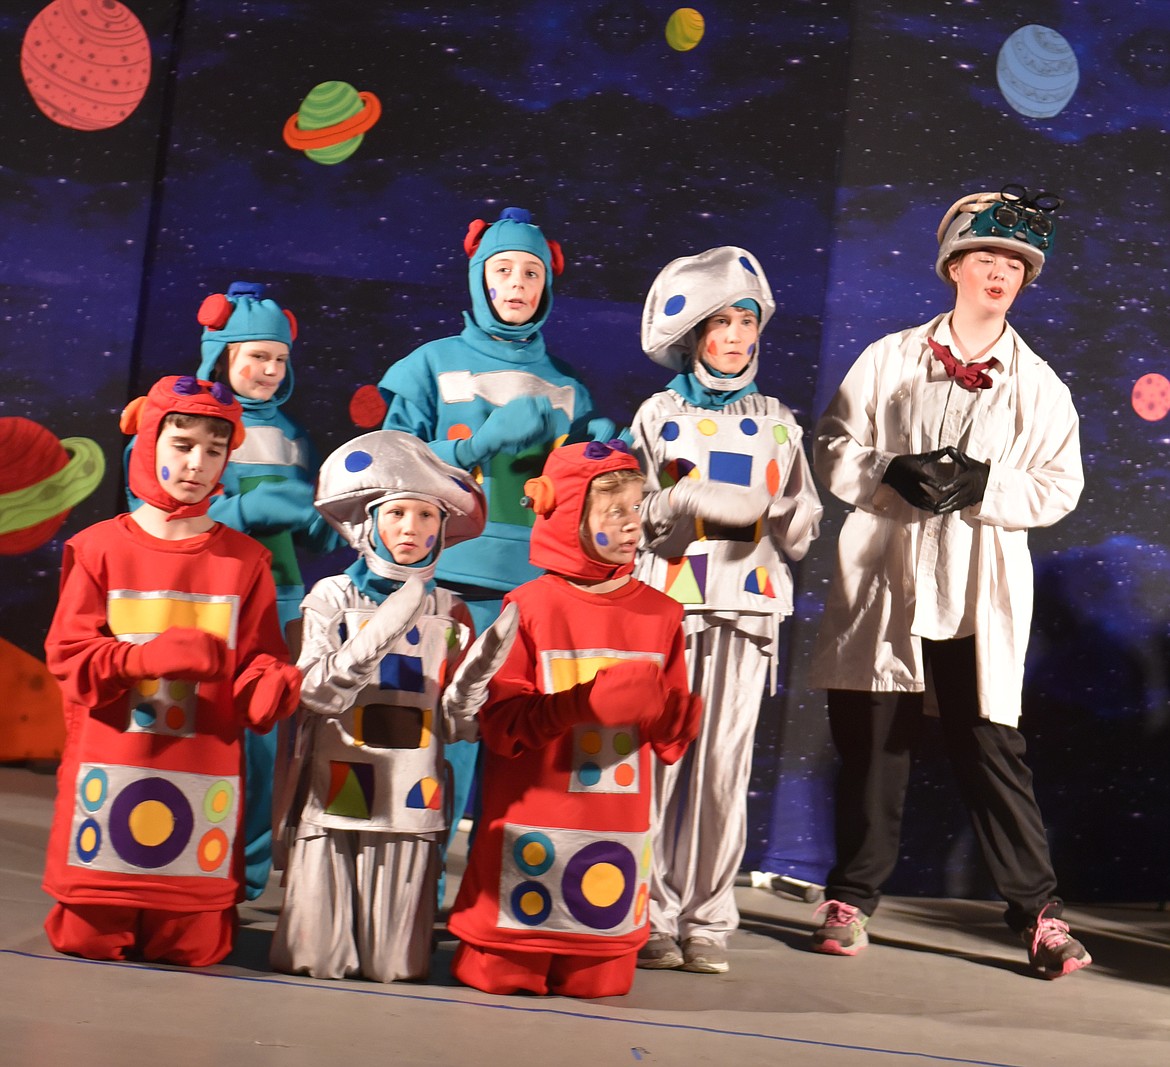 MANICAL SCIENTIST of Lapunta (Anna Hafner, right) and Robots of Lapunta (from left, Marina Tulloch, Tia Bellinger, Melodie Cook, Asher Seymour, Annika Ercanbrack, Greg Tatum) are part of a colorful cast.